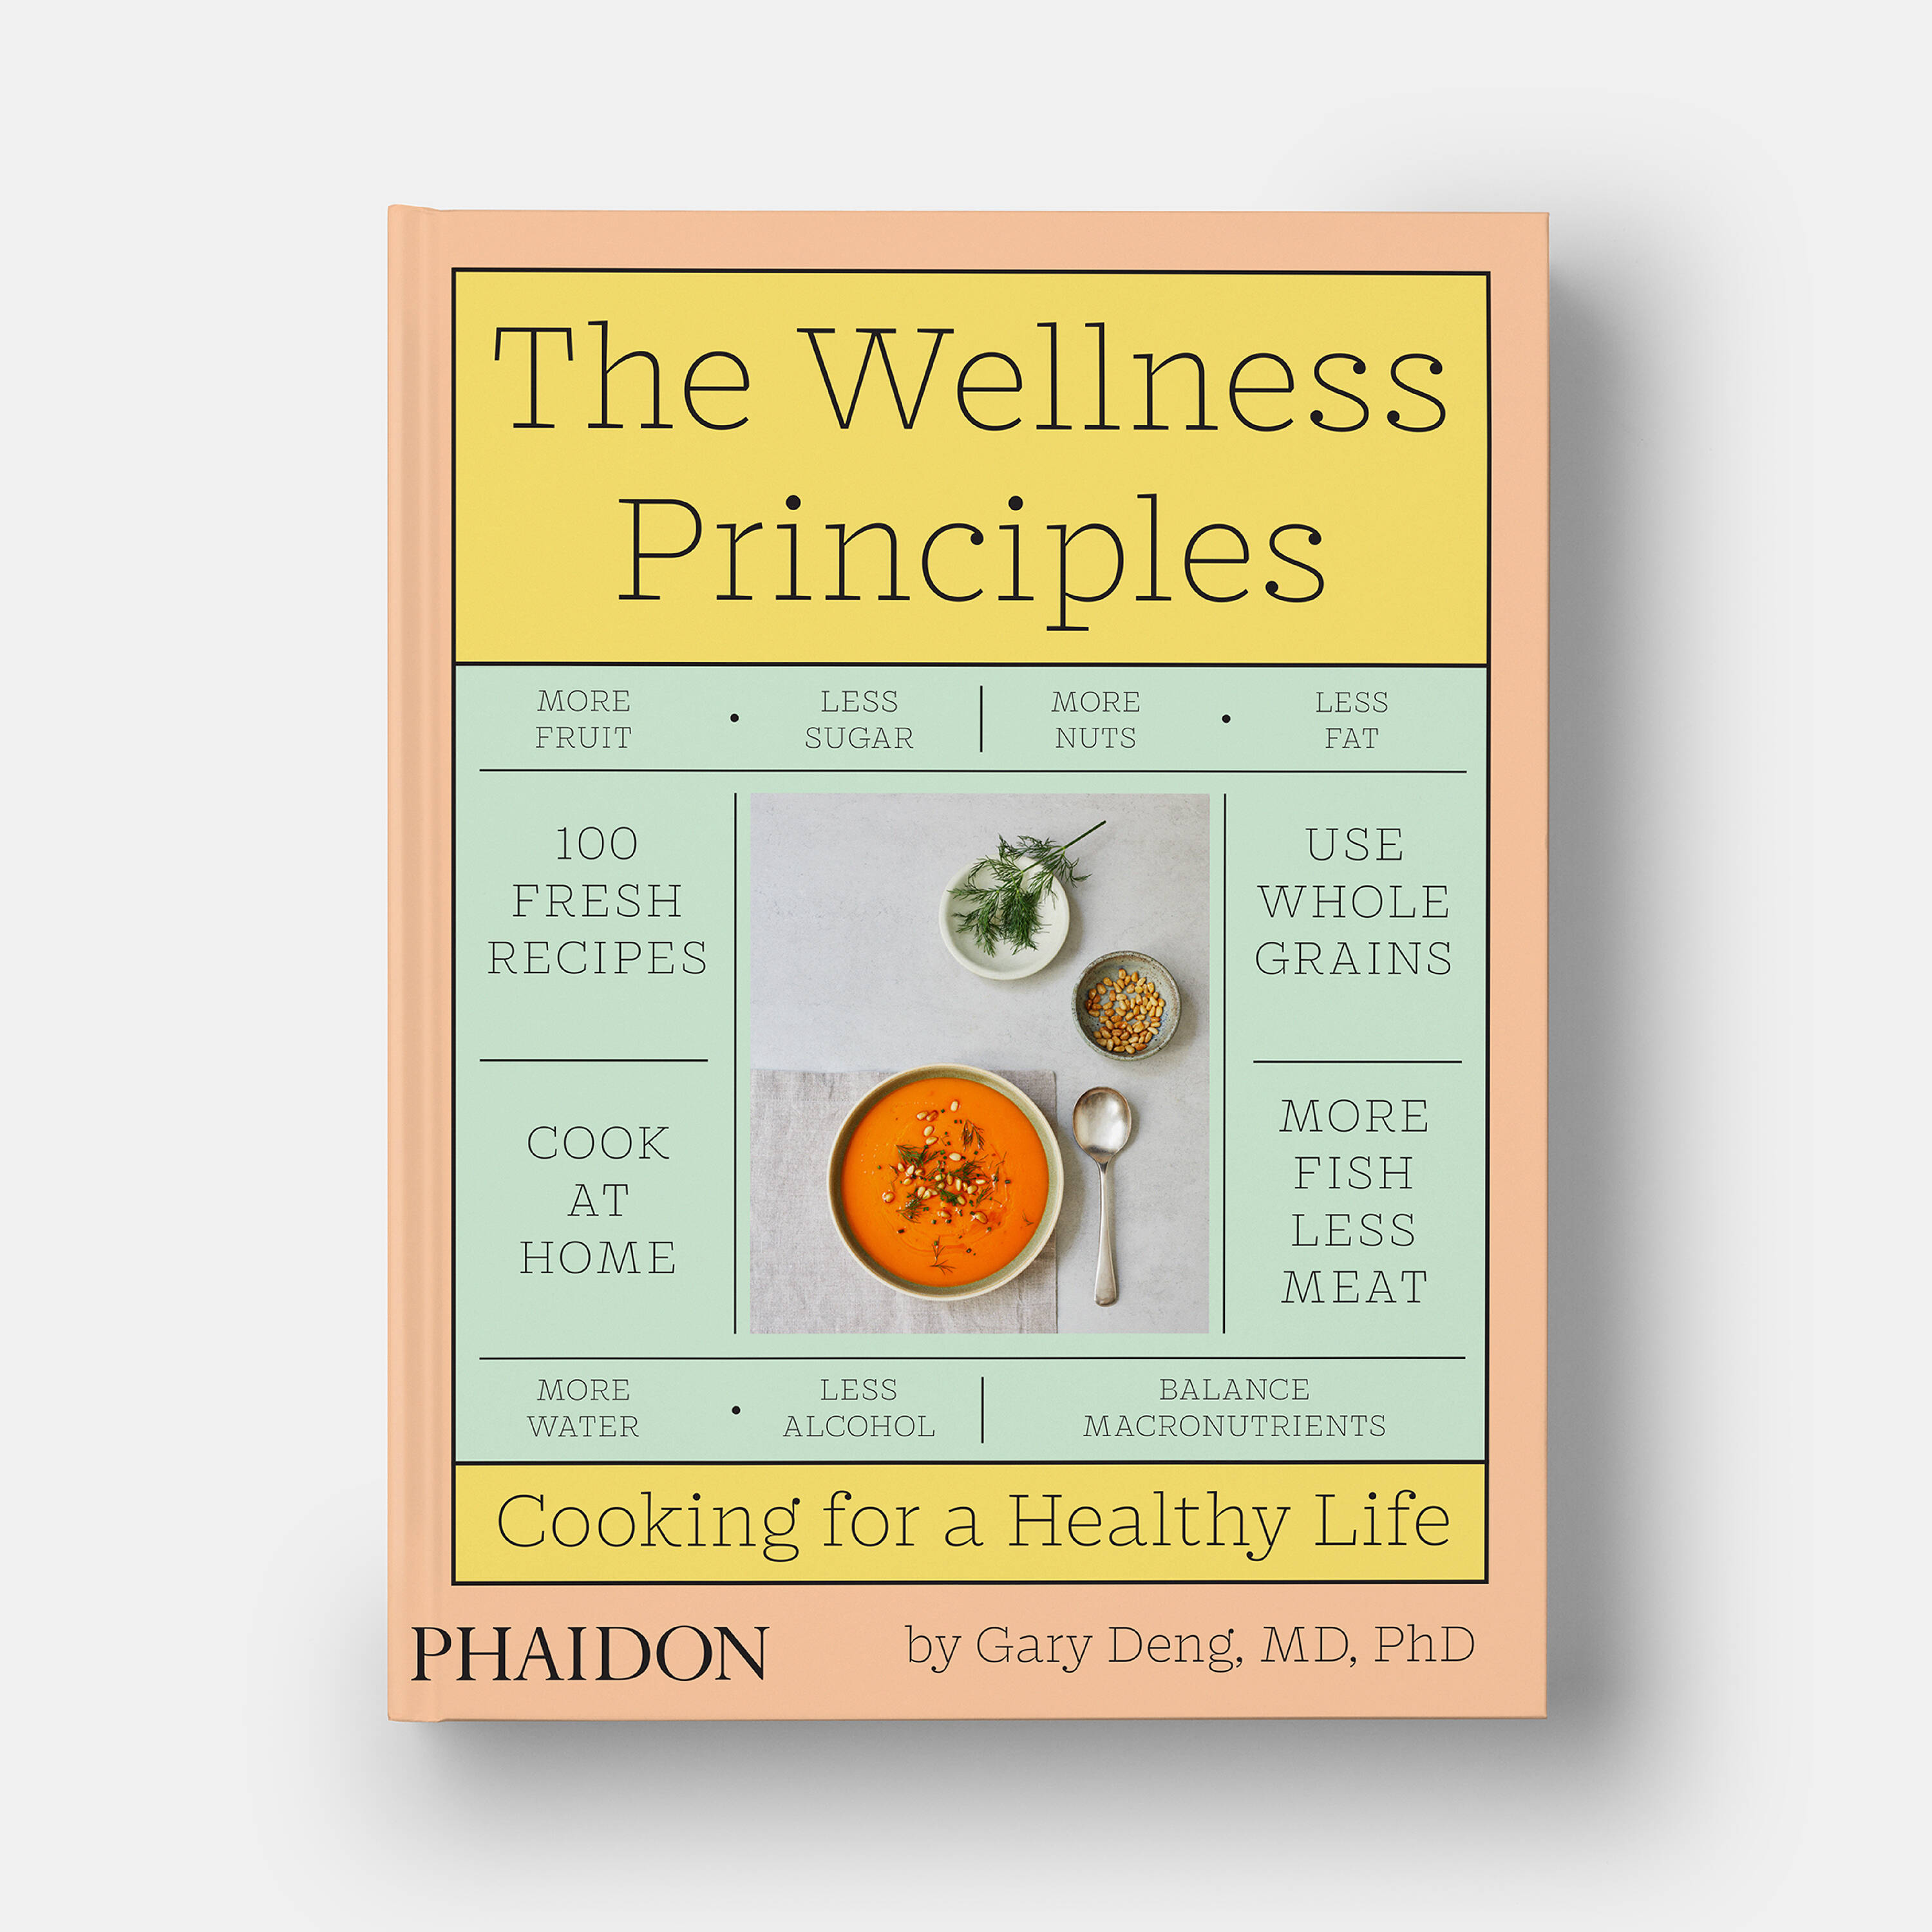 All you need to know about The Wellness Principles